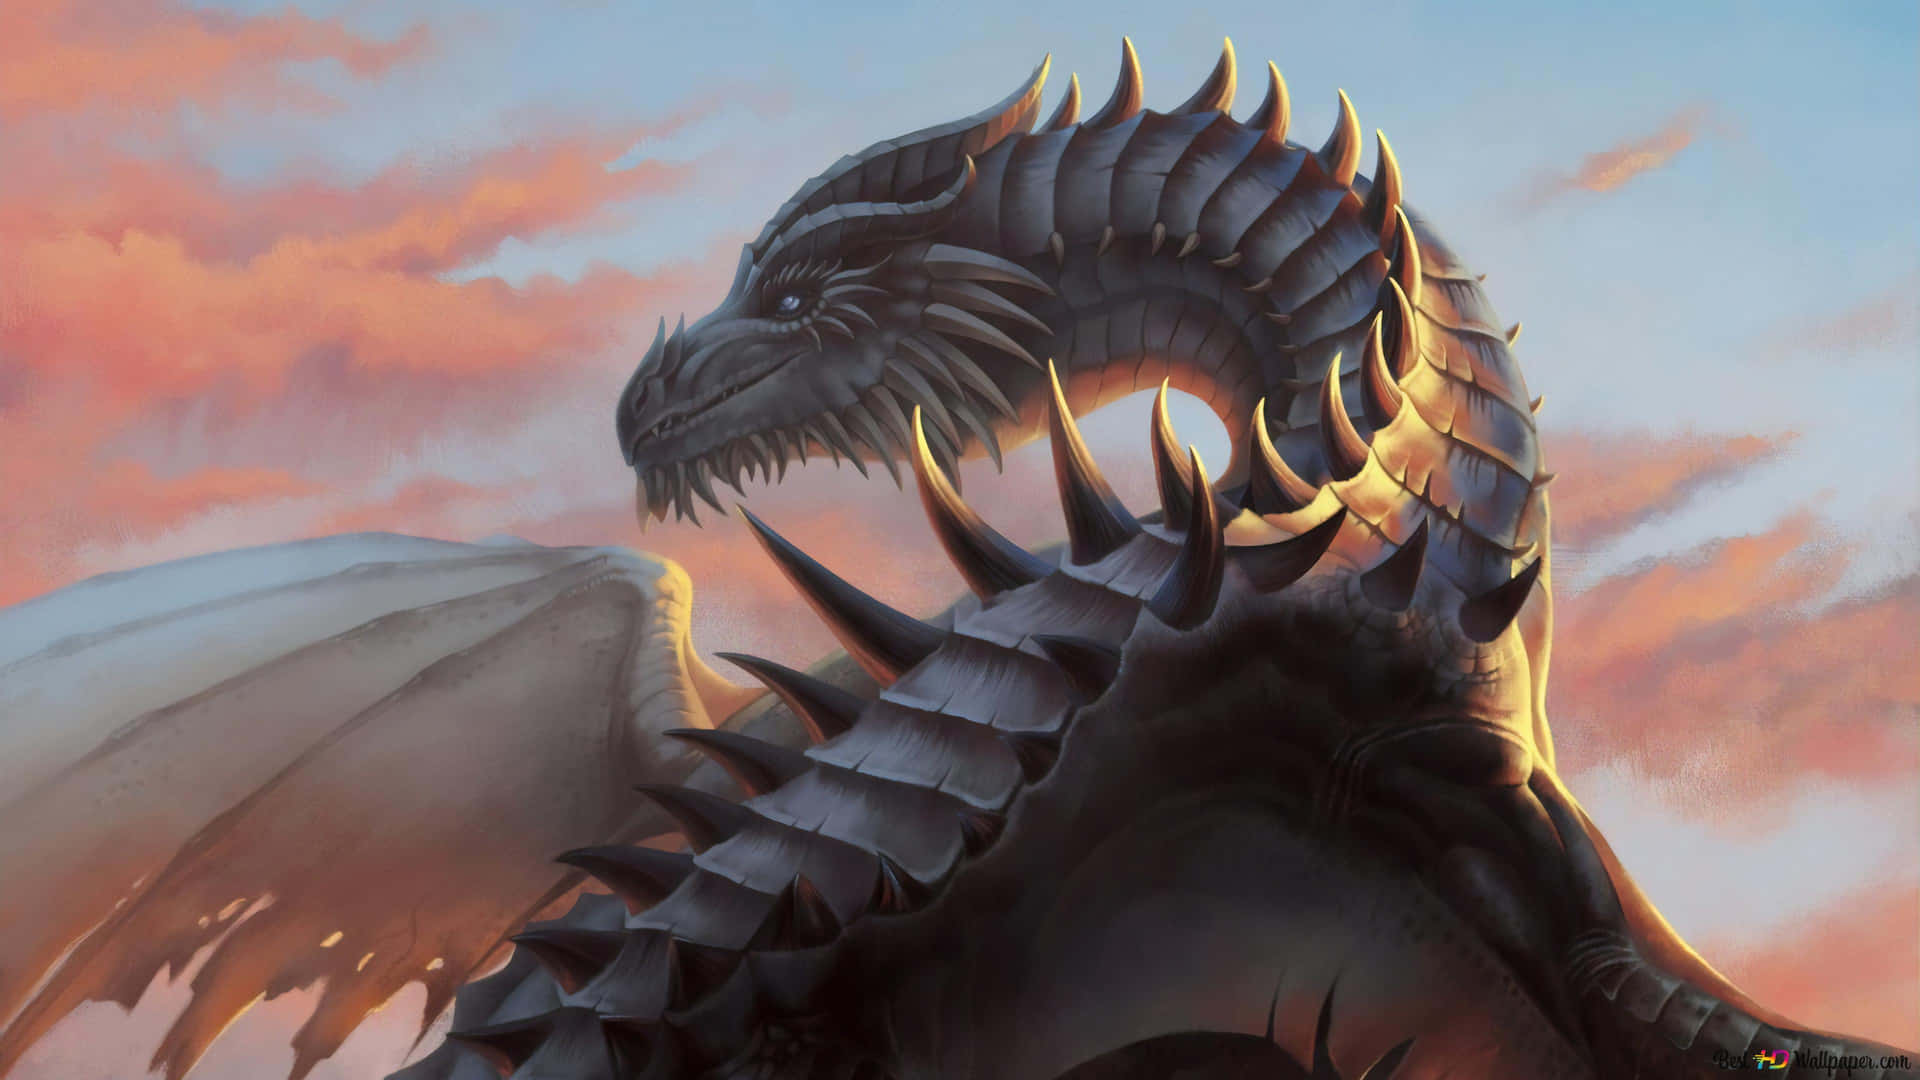 A bright, fire-breathing dragon with powerful wings soaring through the sky Wallpaper